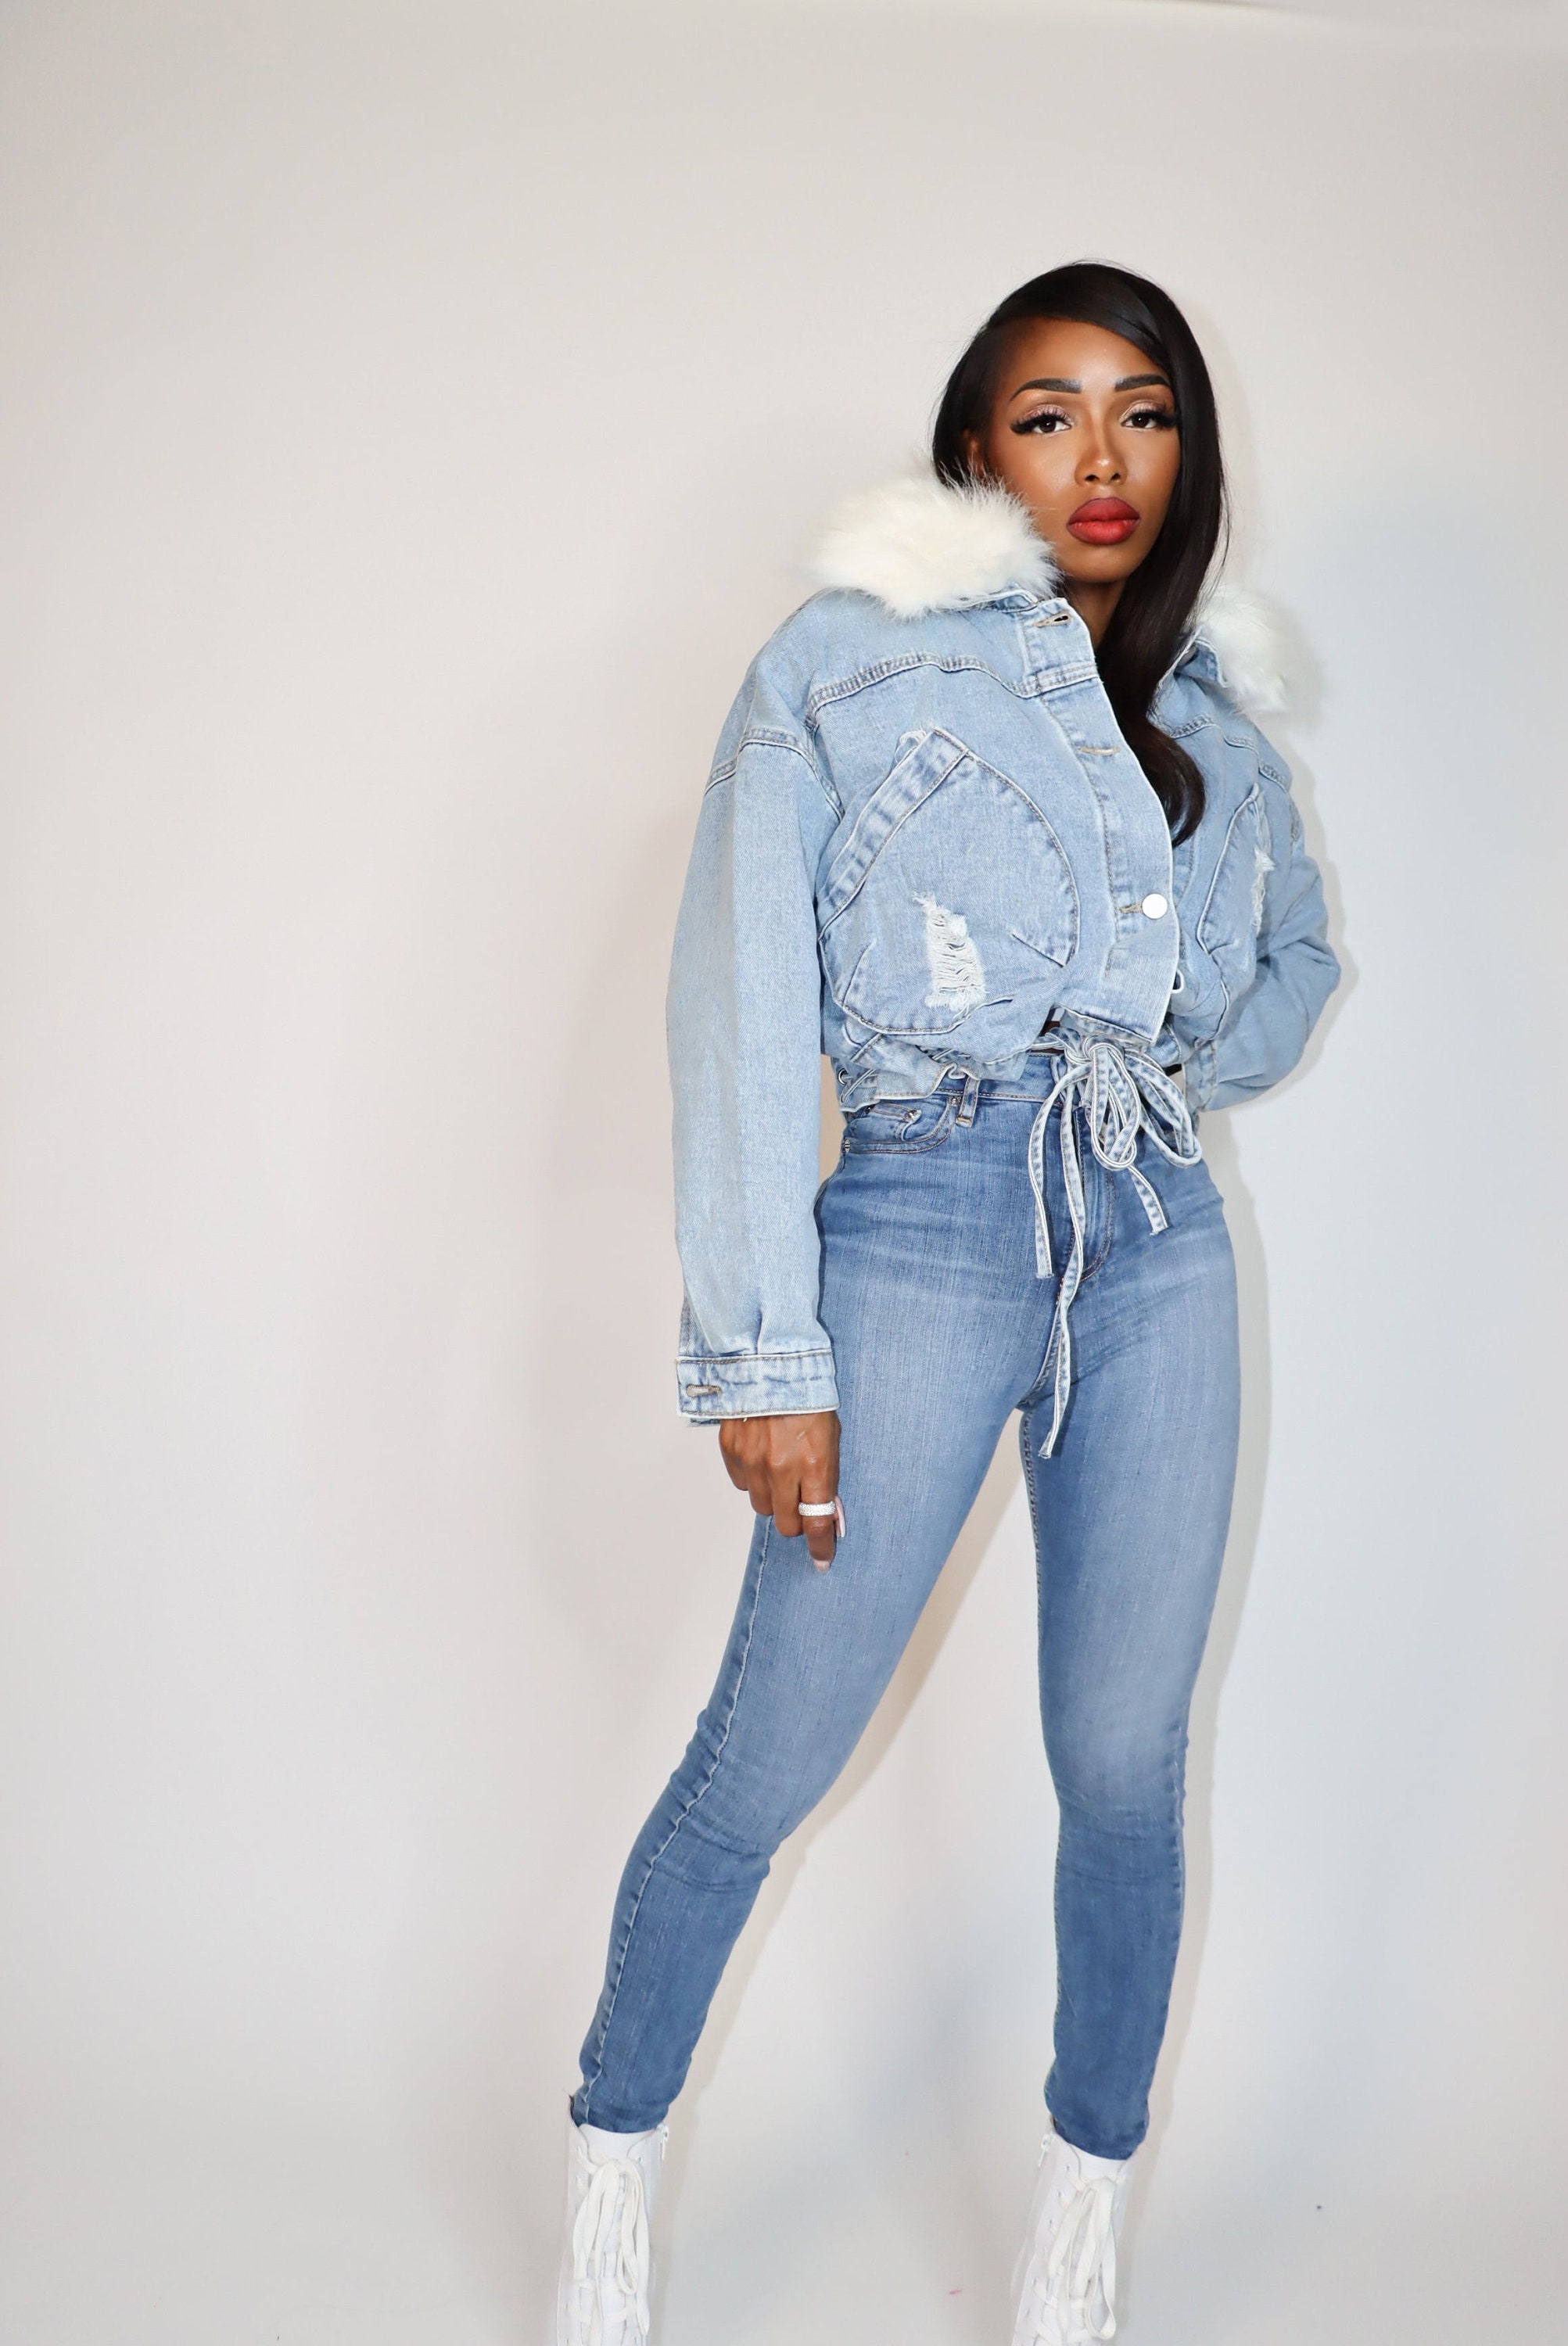 Vintage Plus Size Denim Jacket With Long Sleeves And Button Closure For  Women Autumn/Winter Jeans Coat For Men From Lu04, $48.39 | DHgate.Com